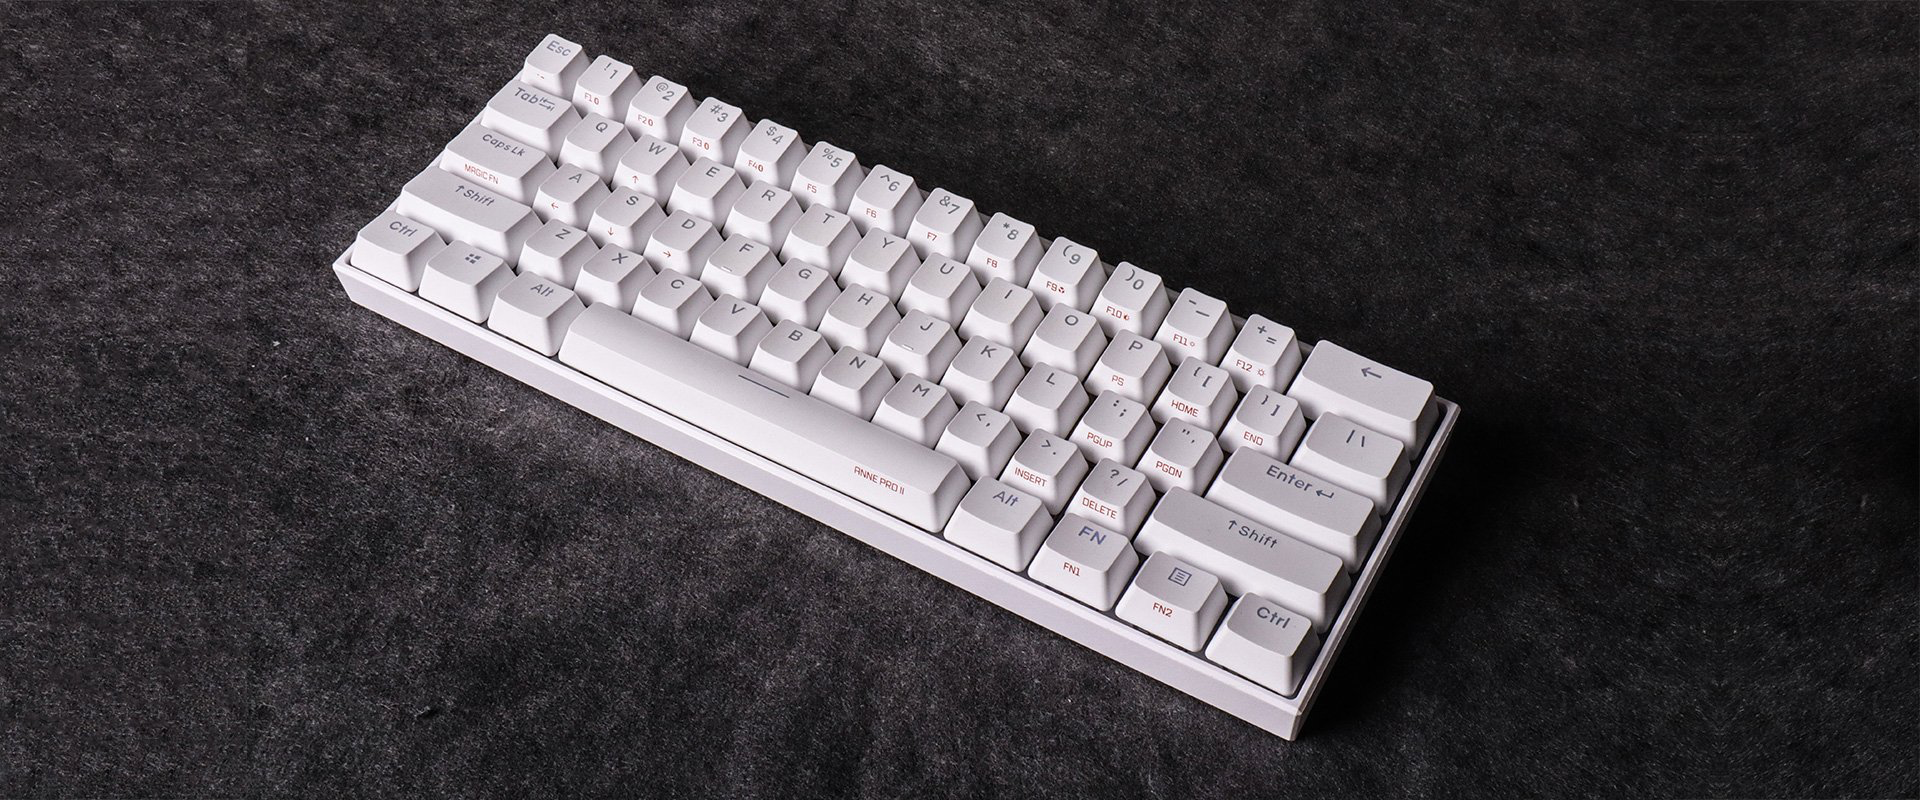 Anne Pro 2 (image from the official site)